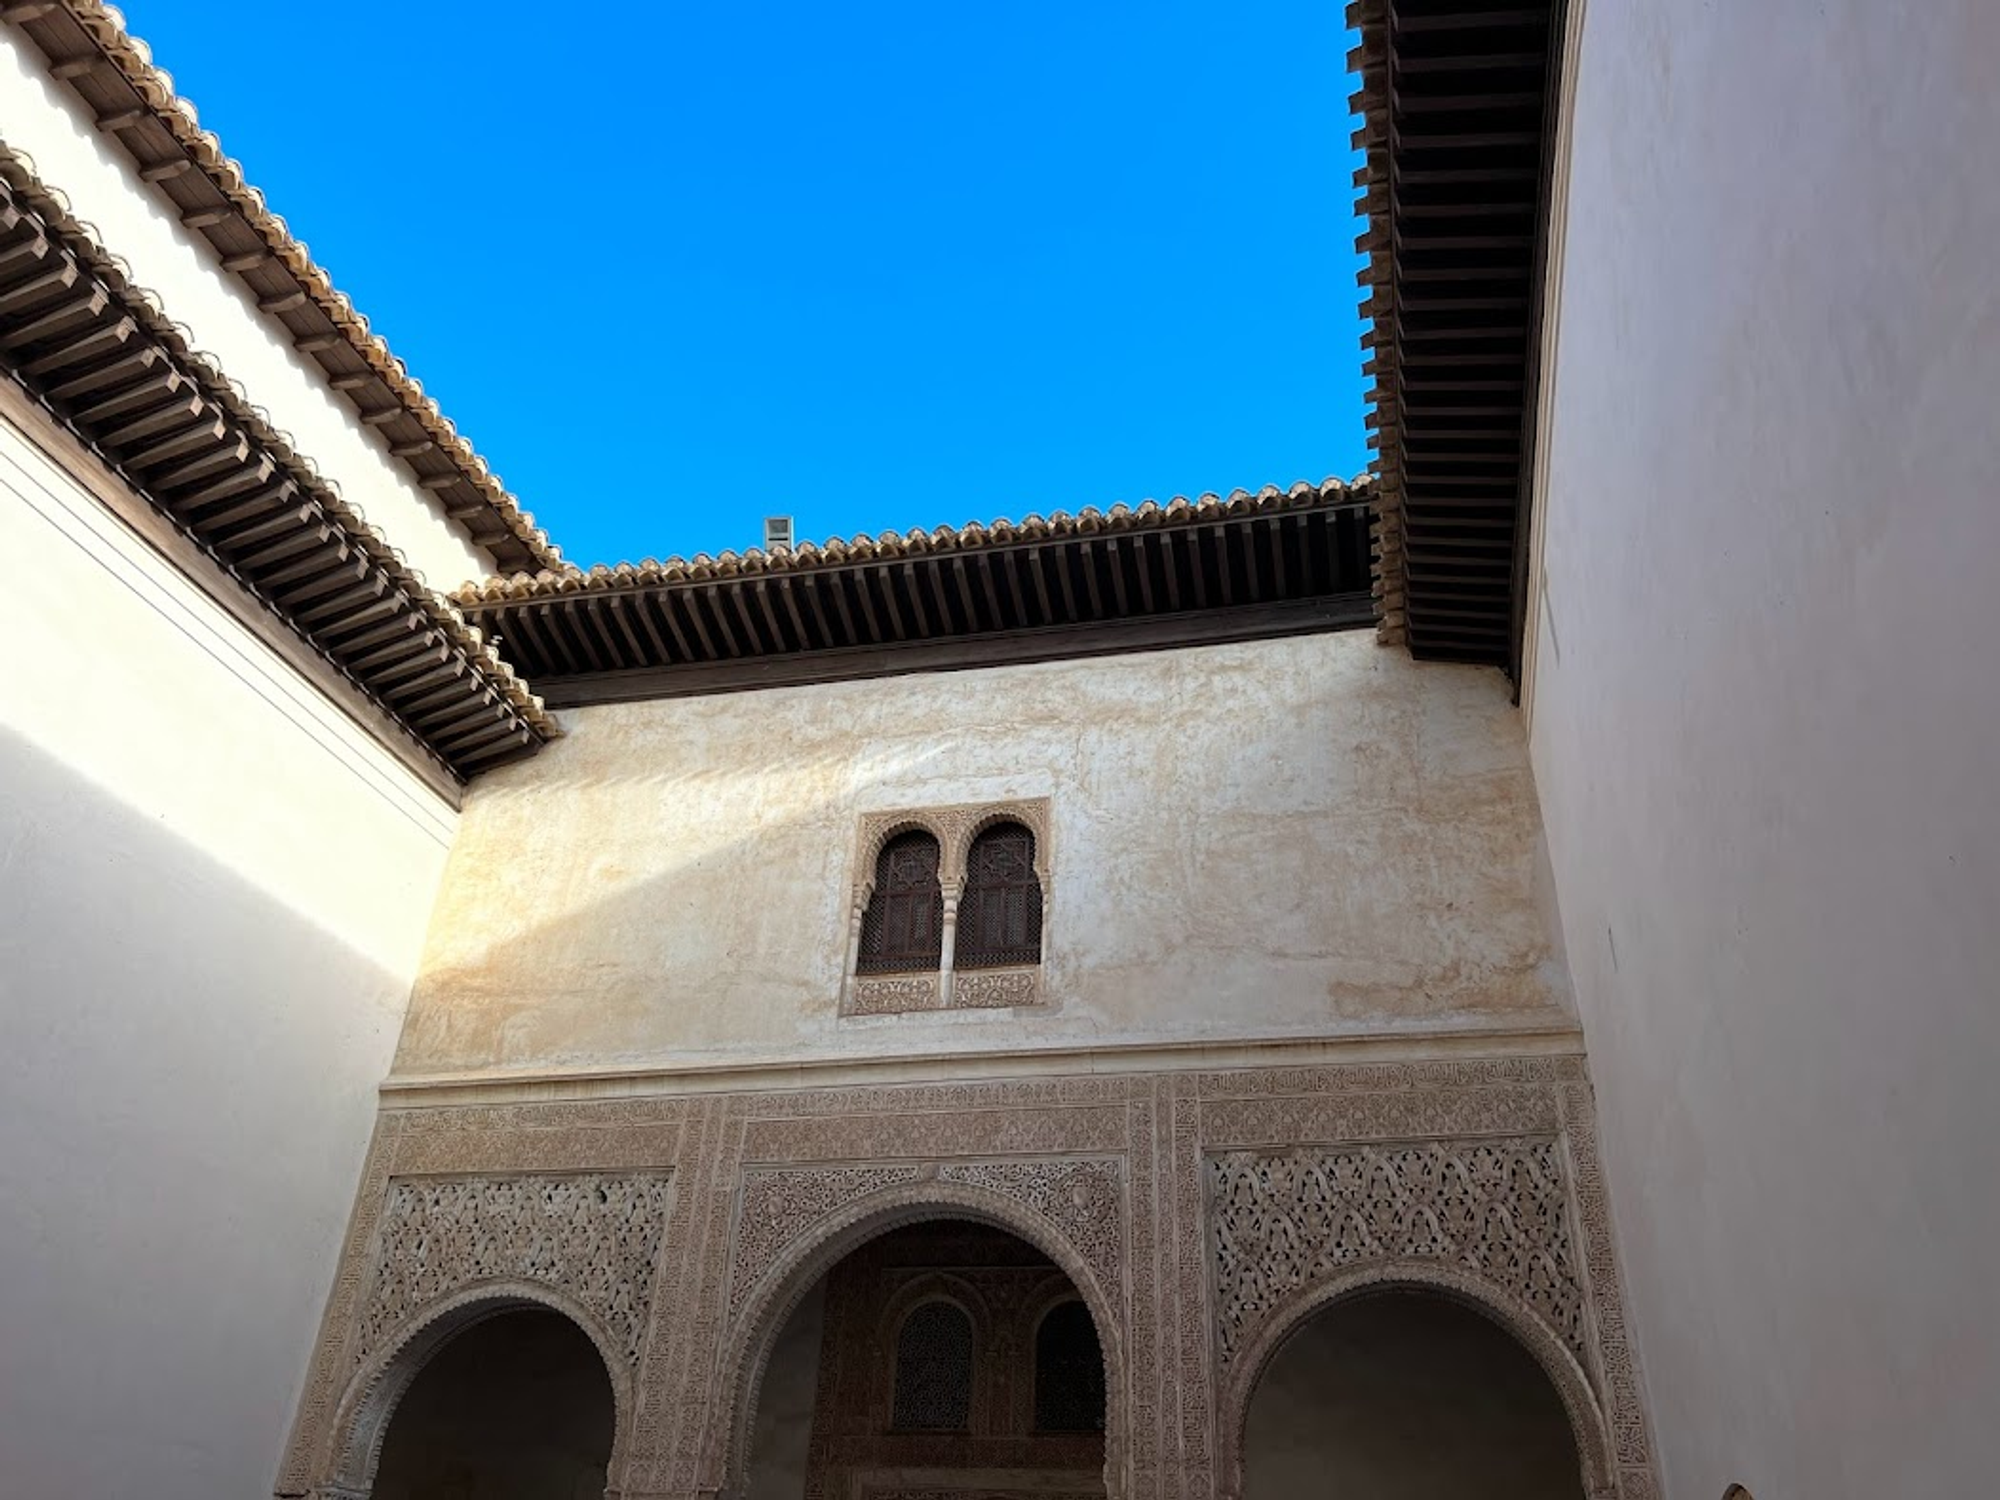 Such a blend of Islamic and Spanish architecture.